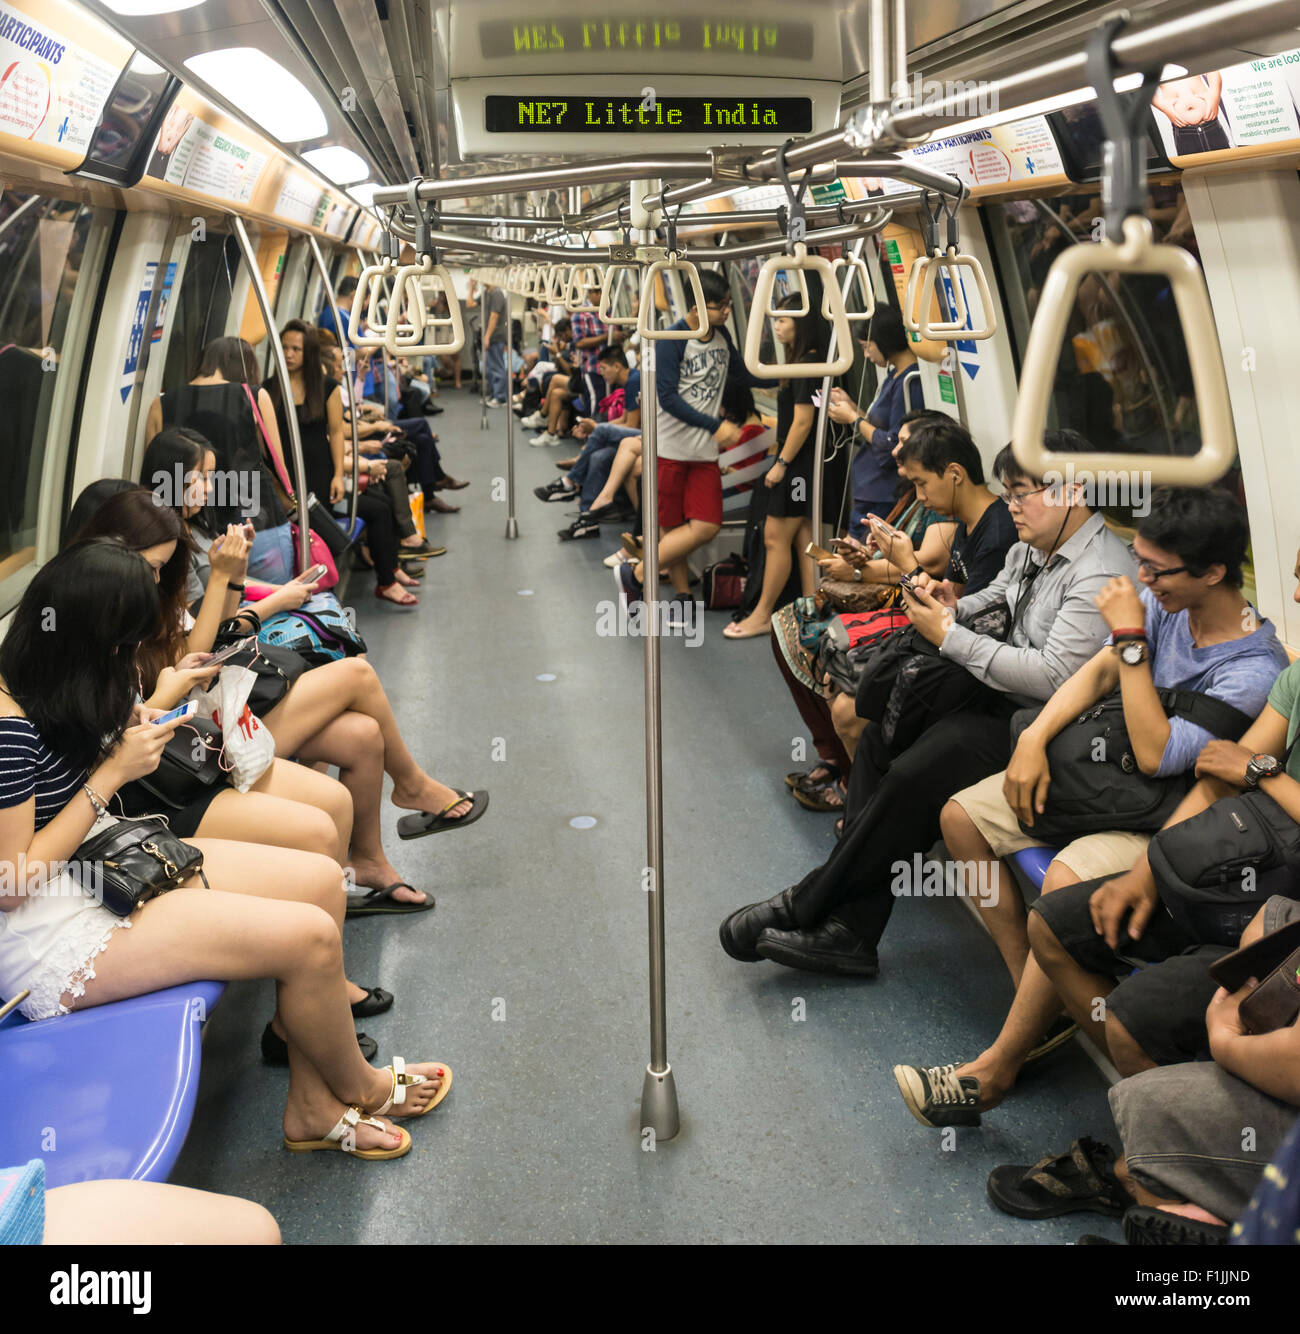 Asian people sitting in a subway train, Little India station, Singapore Stock Photo